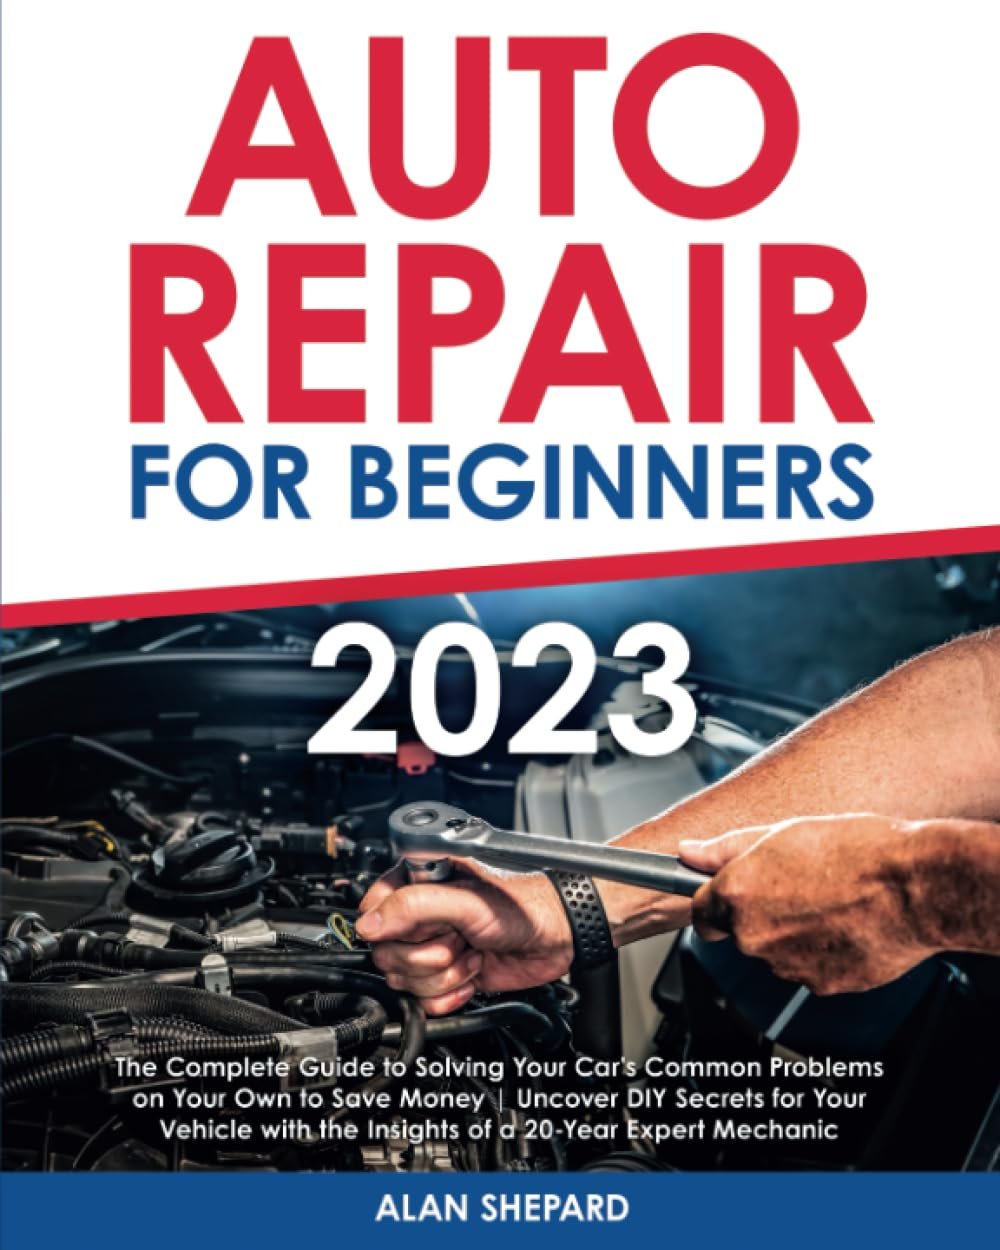 Complete Guide to Car Repairs Review